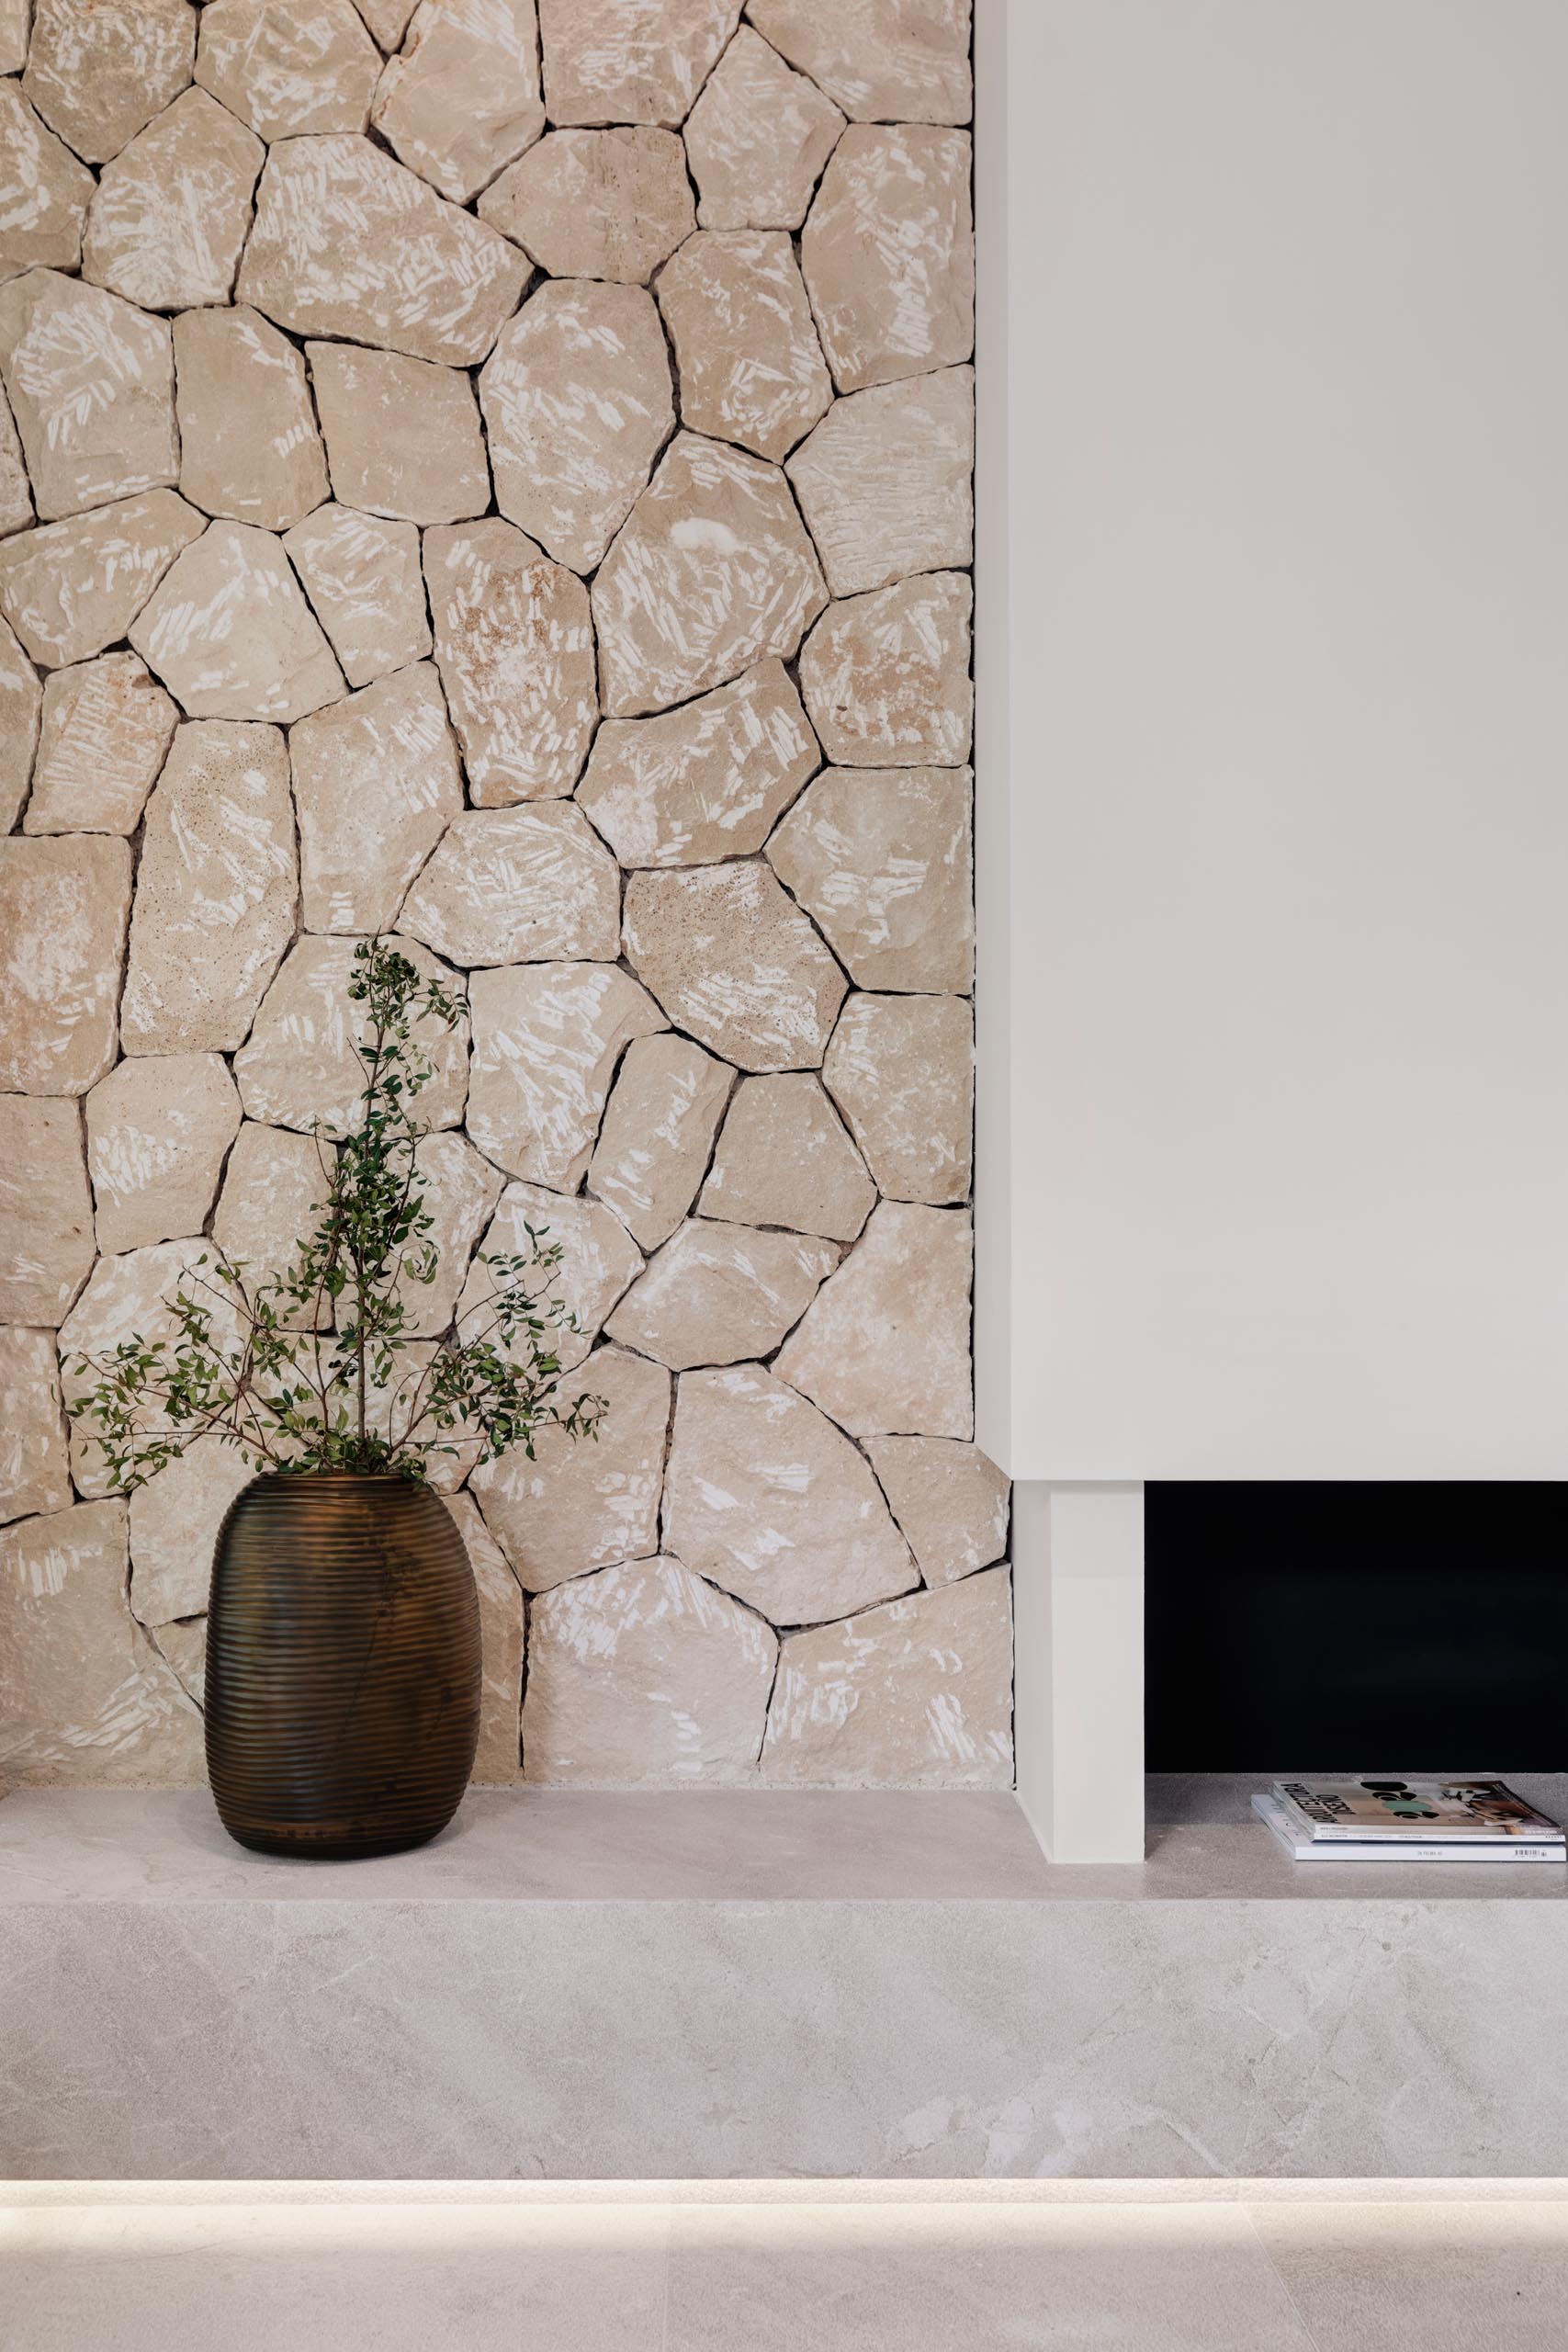 A stone wall and hidden lighting are unique design elements of this modern living room.